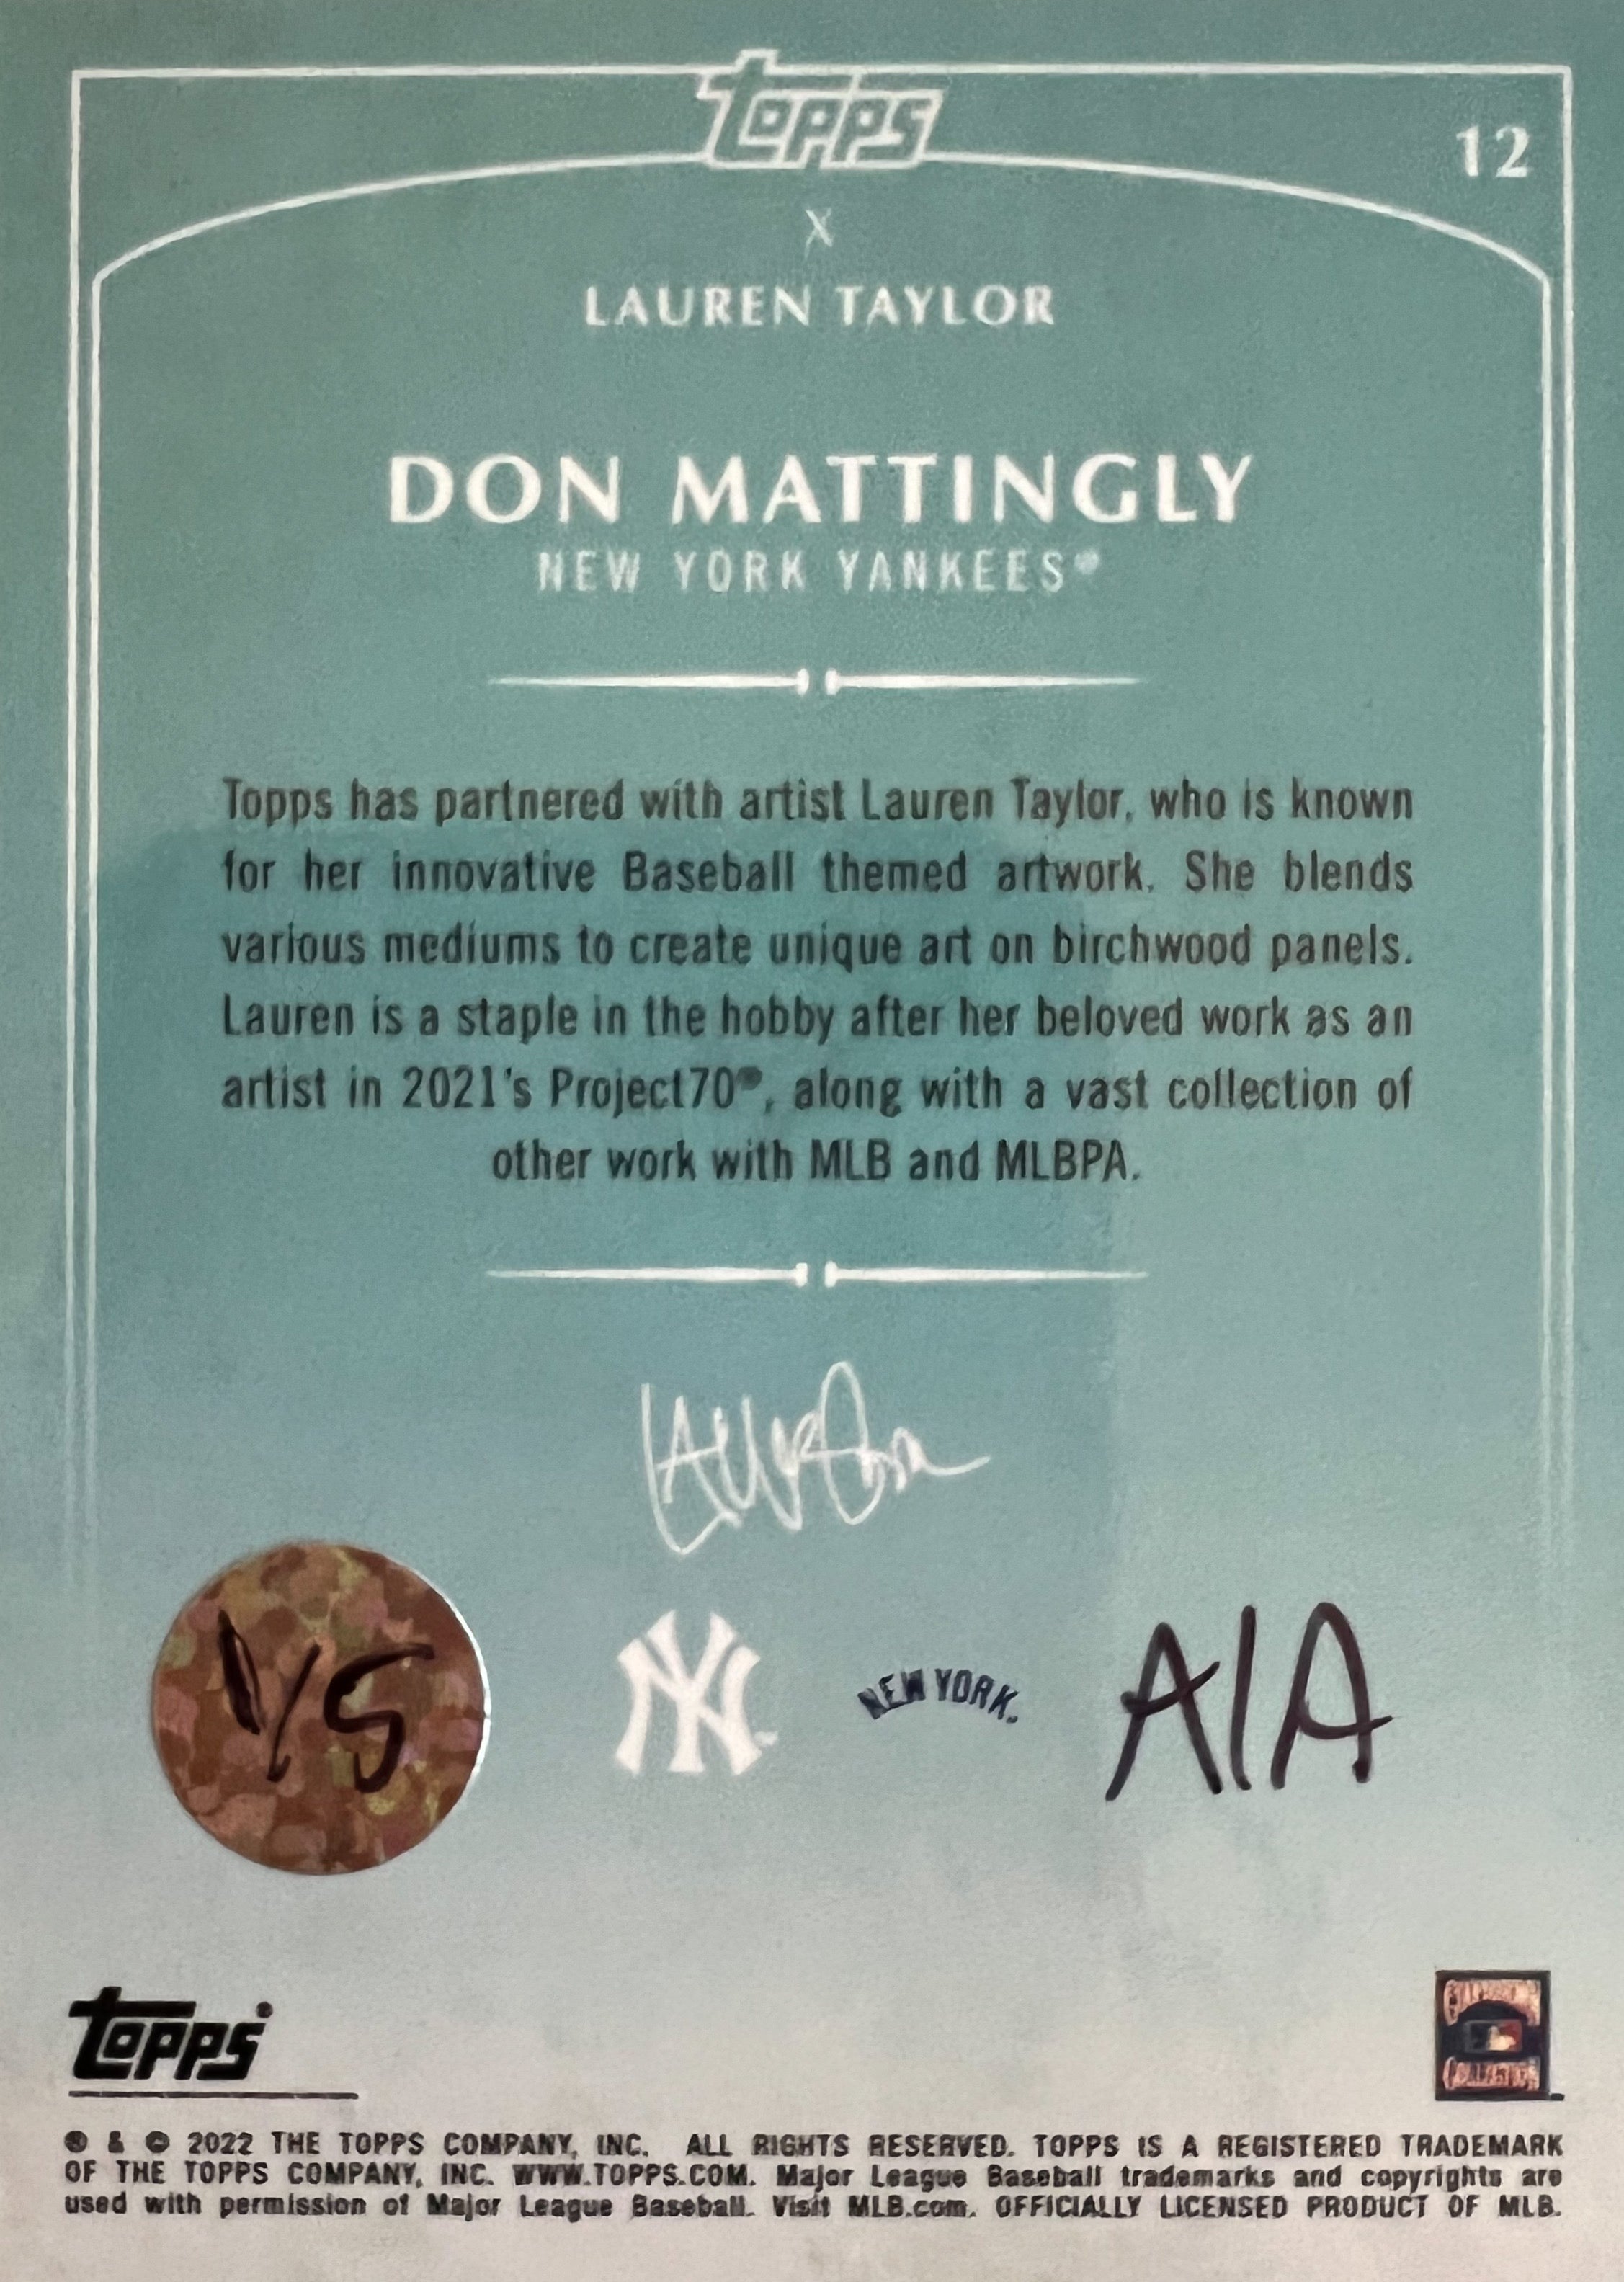 Lauren Taylor x Topps - /5 Silver Artist Autographed Don Mattingly LAVA CHASE Card